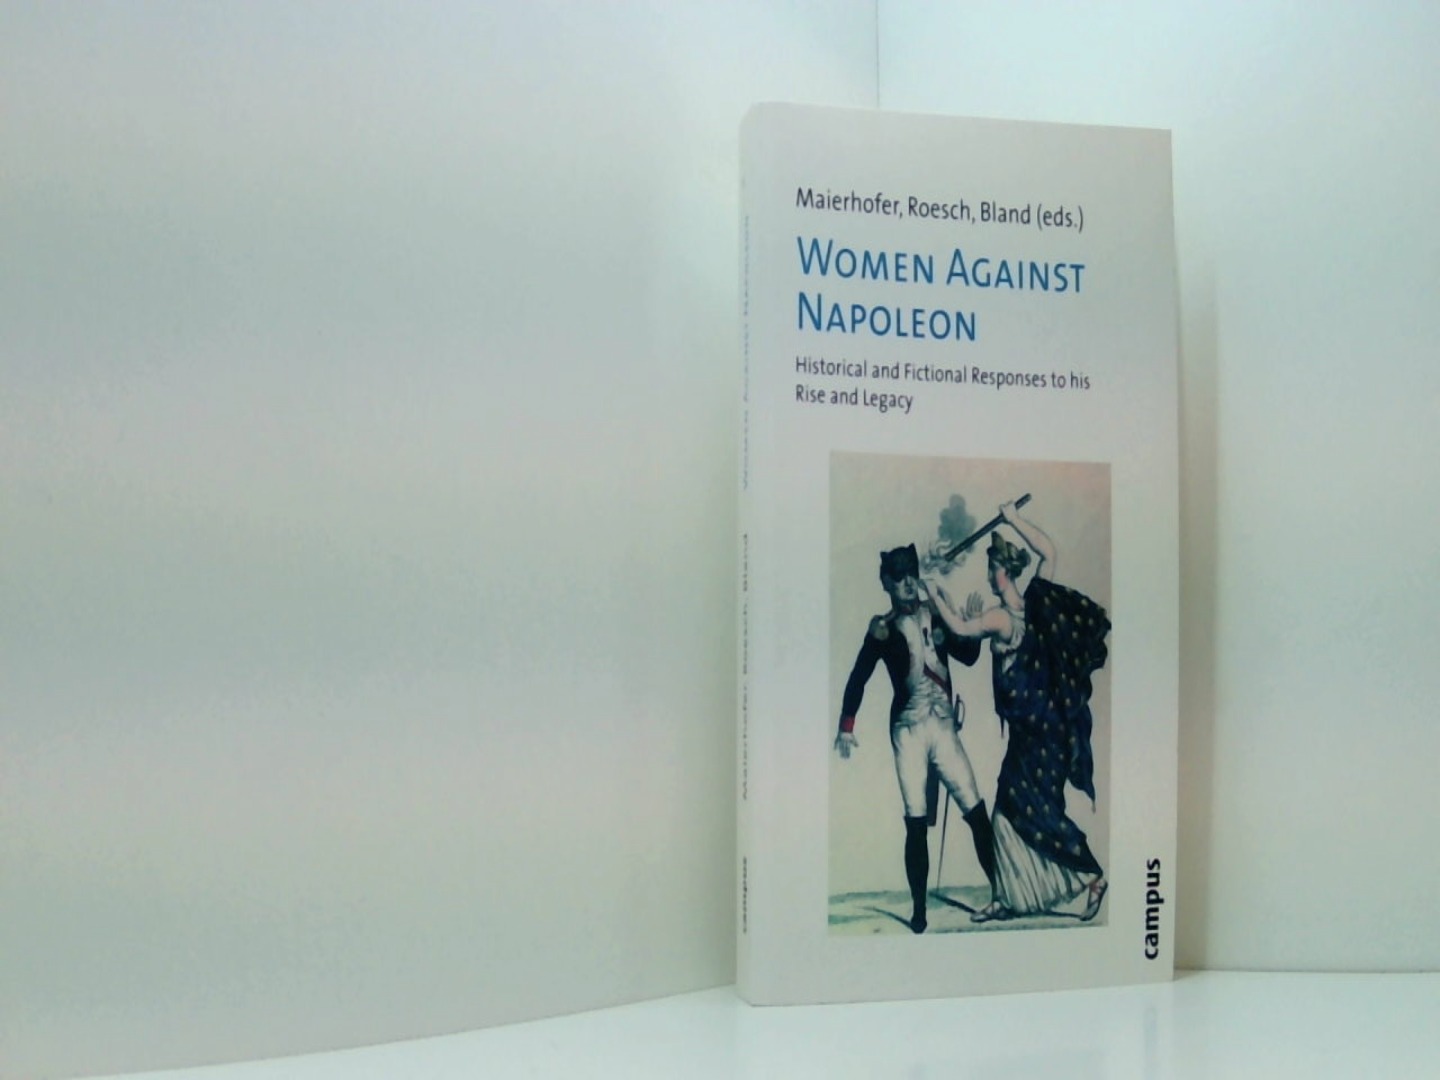 Women Against Napoleon: Historical and Fictional Responses to his Rise and Legacy  1 - Maierhofer, Waltraud, M. Rösch Gertrud Caroline Bland  u. a.